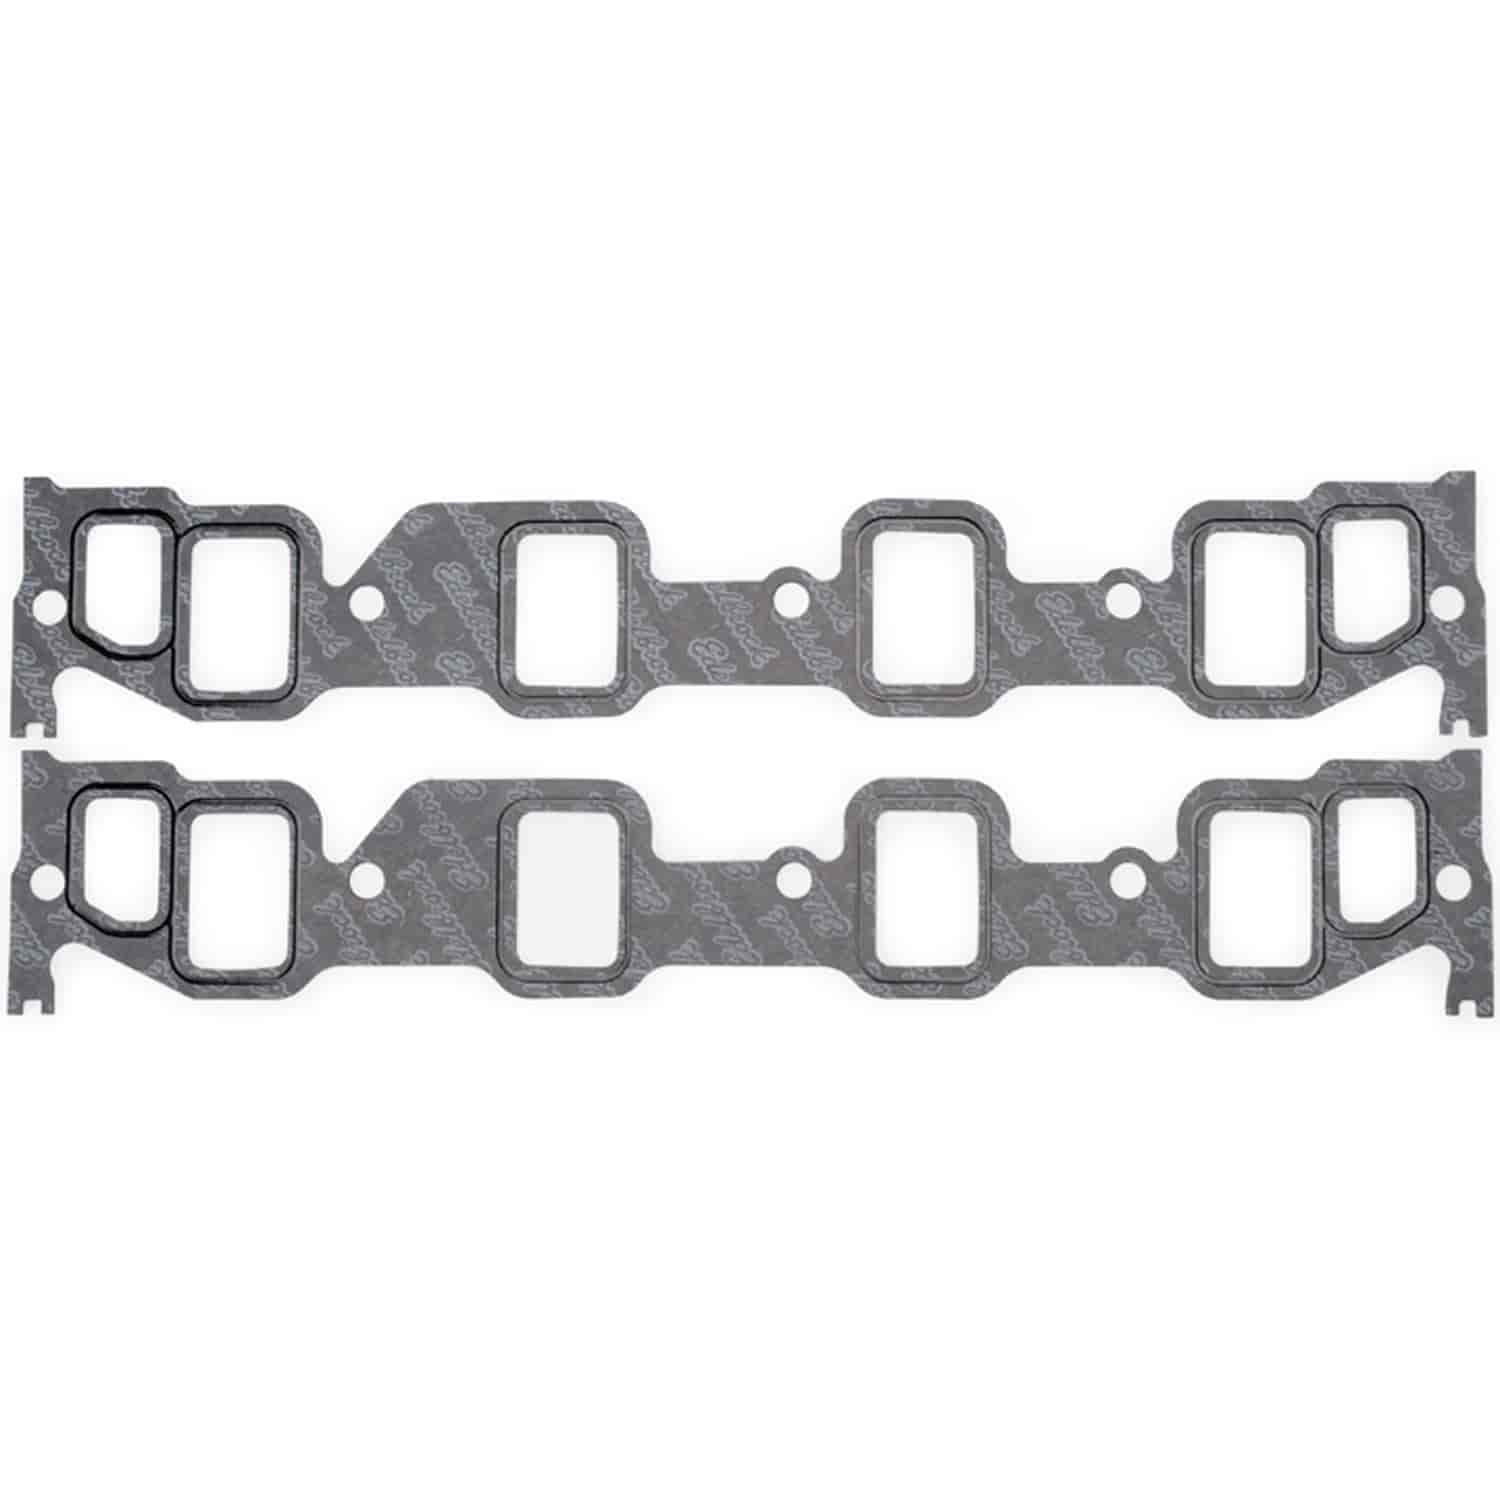 Intake Gaskets for Ford FE 390-428